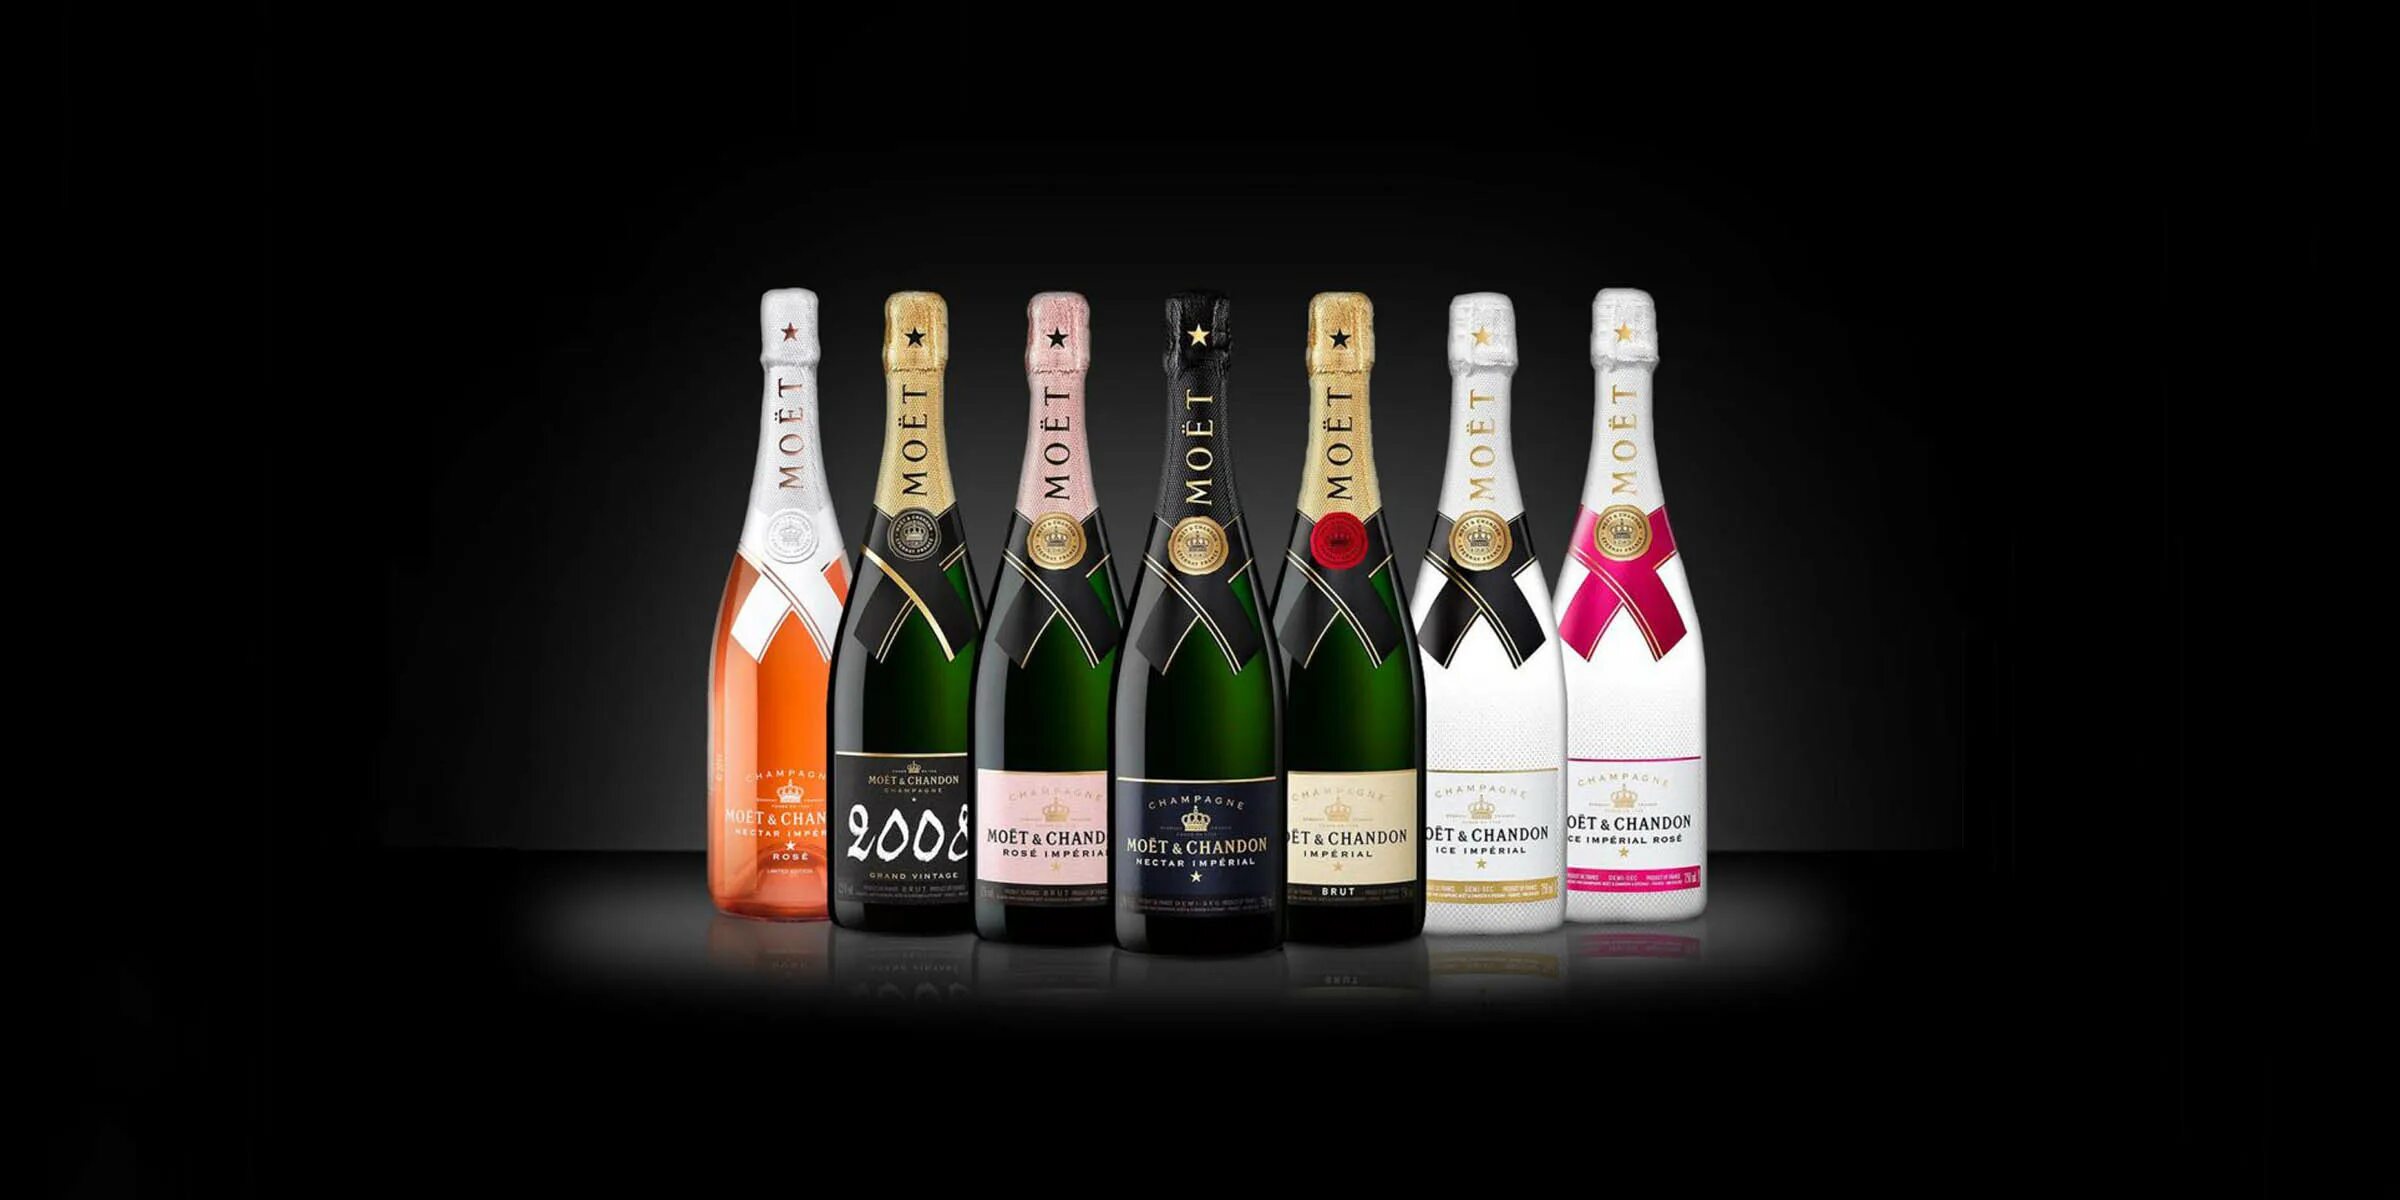 Champagne moet Chandon. Moet Nectar Imperial. Шампанское moët Nectar Imperial. Moët Chandon Rose 3. 5 бутылок шампанского